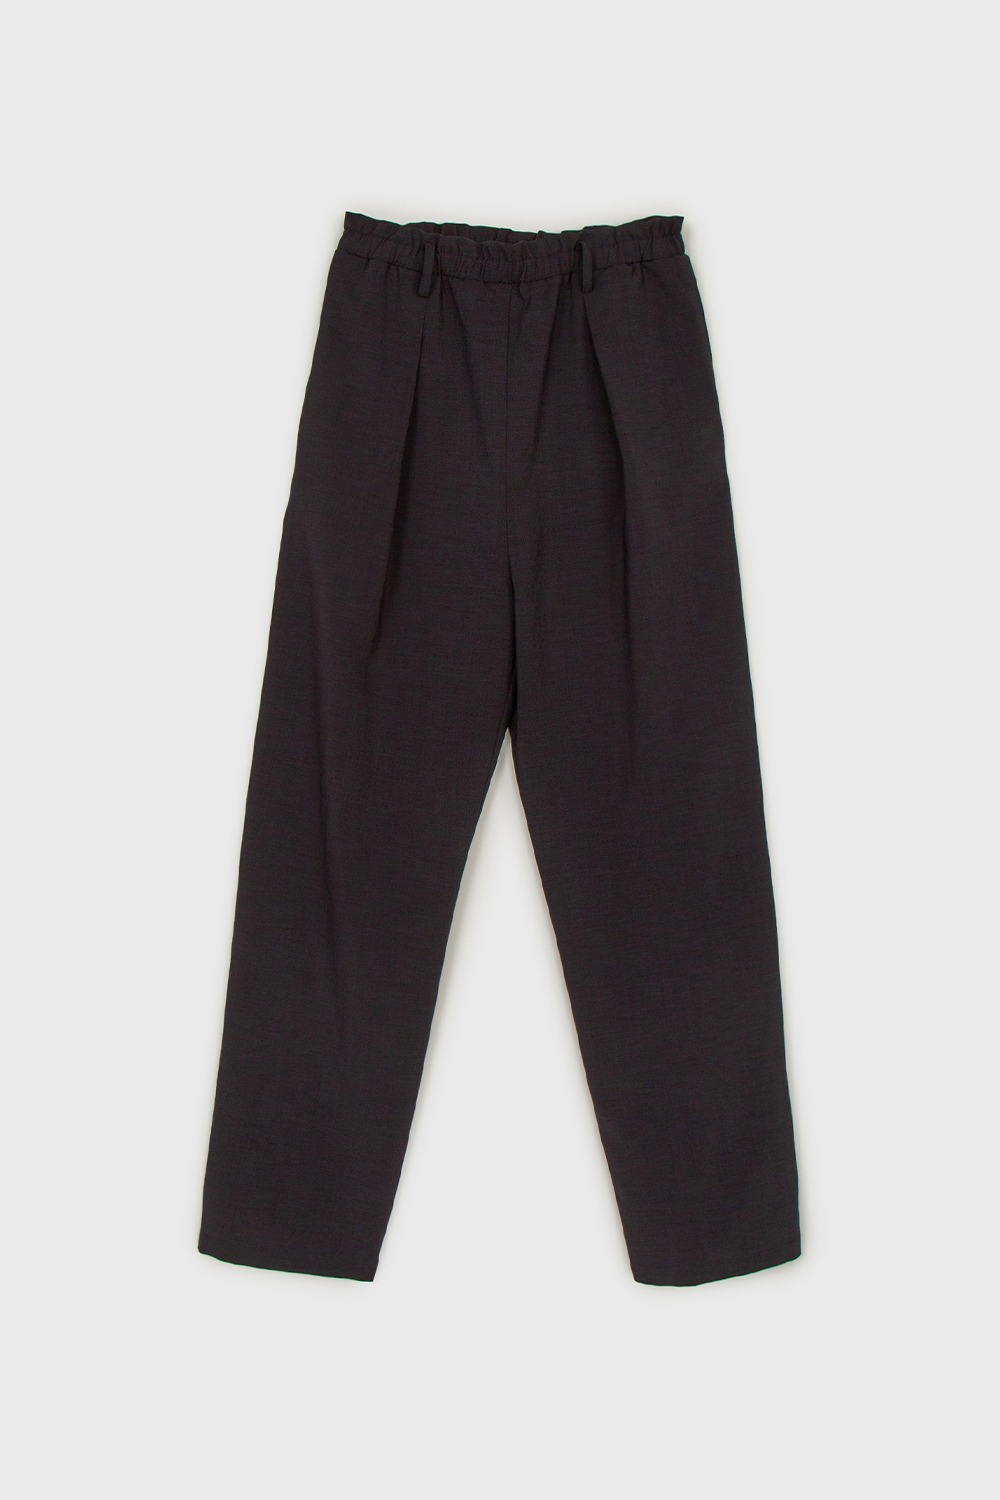 RELAXED WIDE PANTS - BLACK